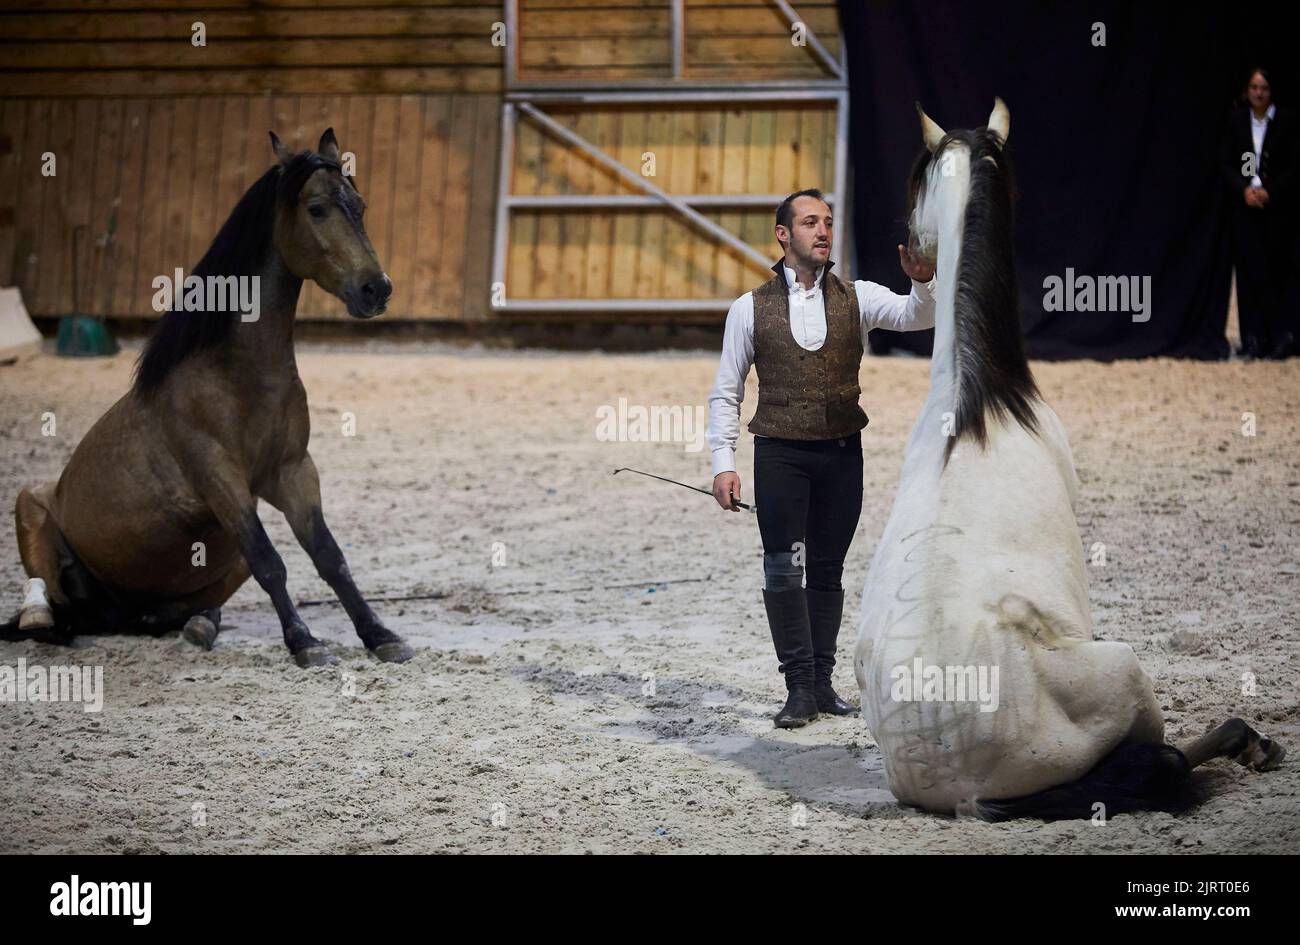 Lons-le-Saunier (central-eastern France): horse-breaking, horse show by Kevin Ferreira at the riding school of Mancy within the framework of the event Stock Photo